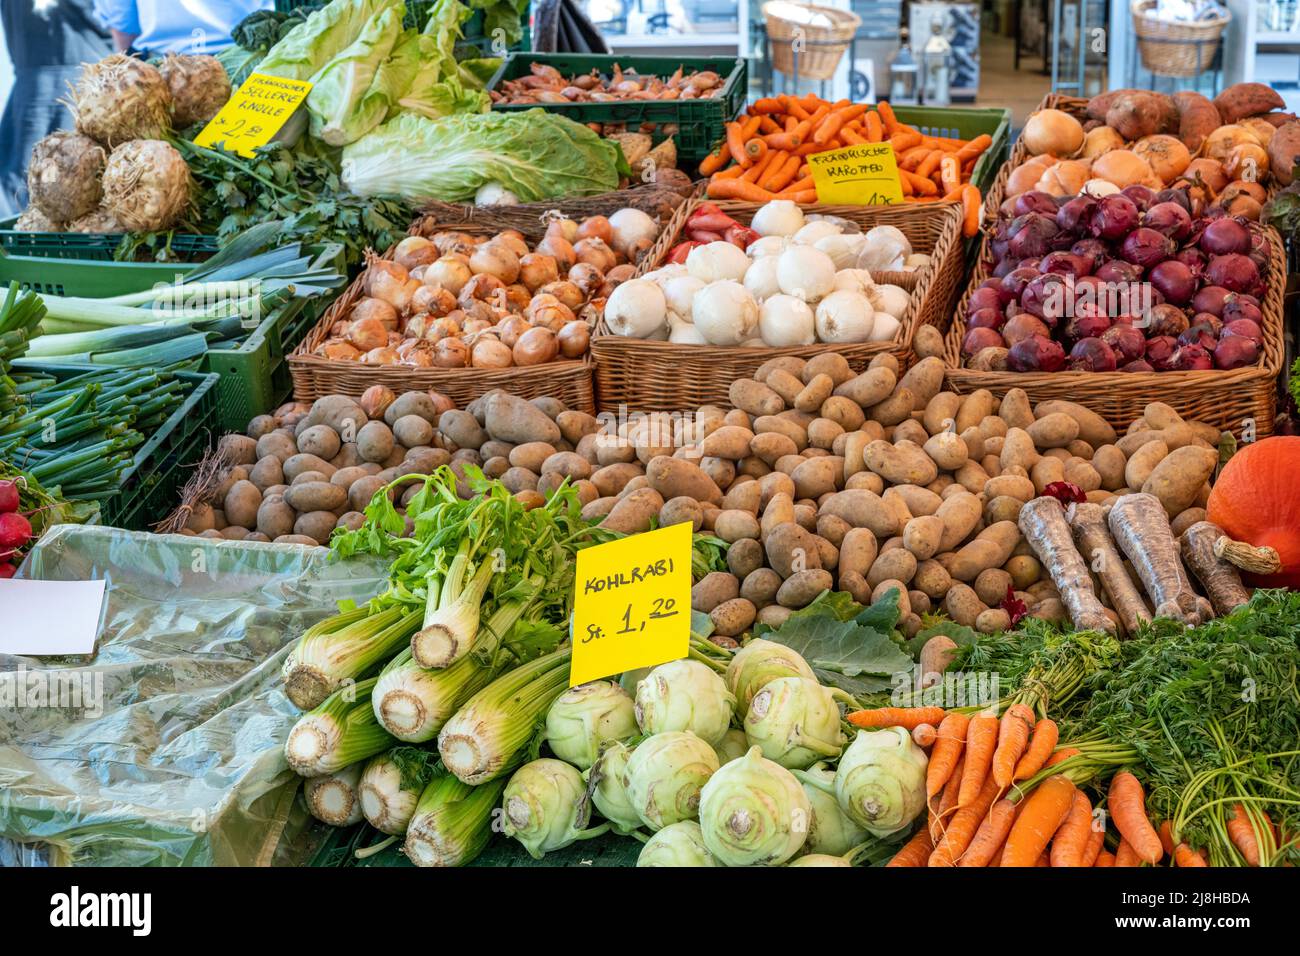 Great choice a fresh vegetables at a market stall Stock Photo